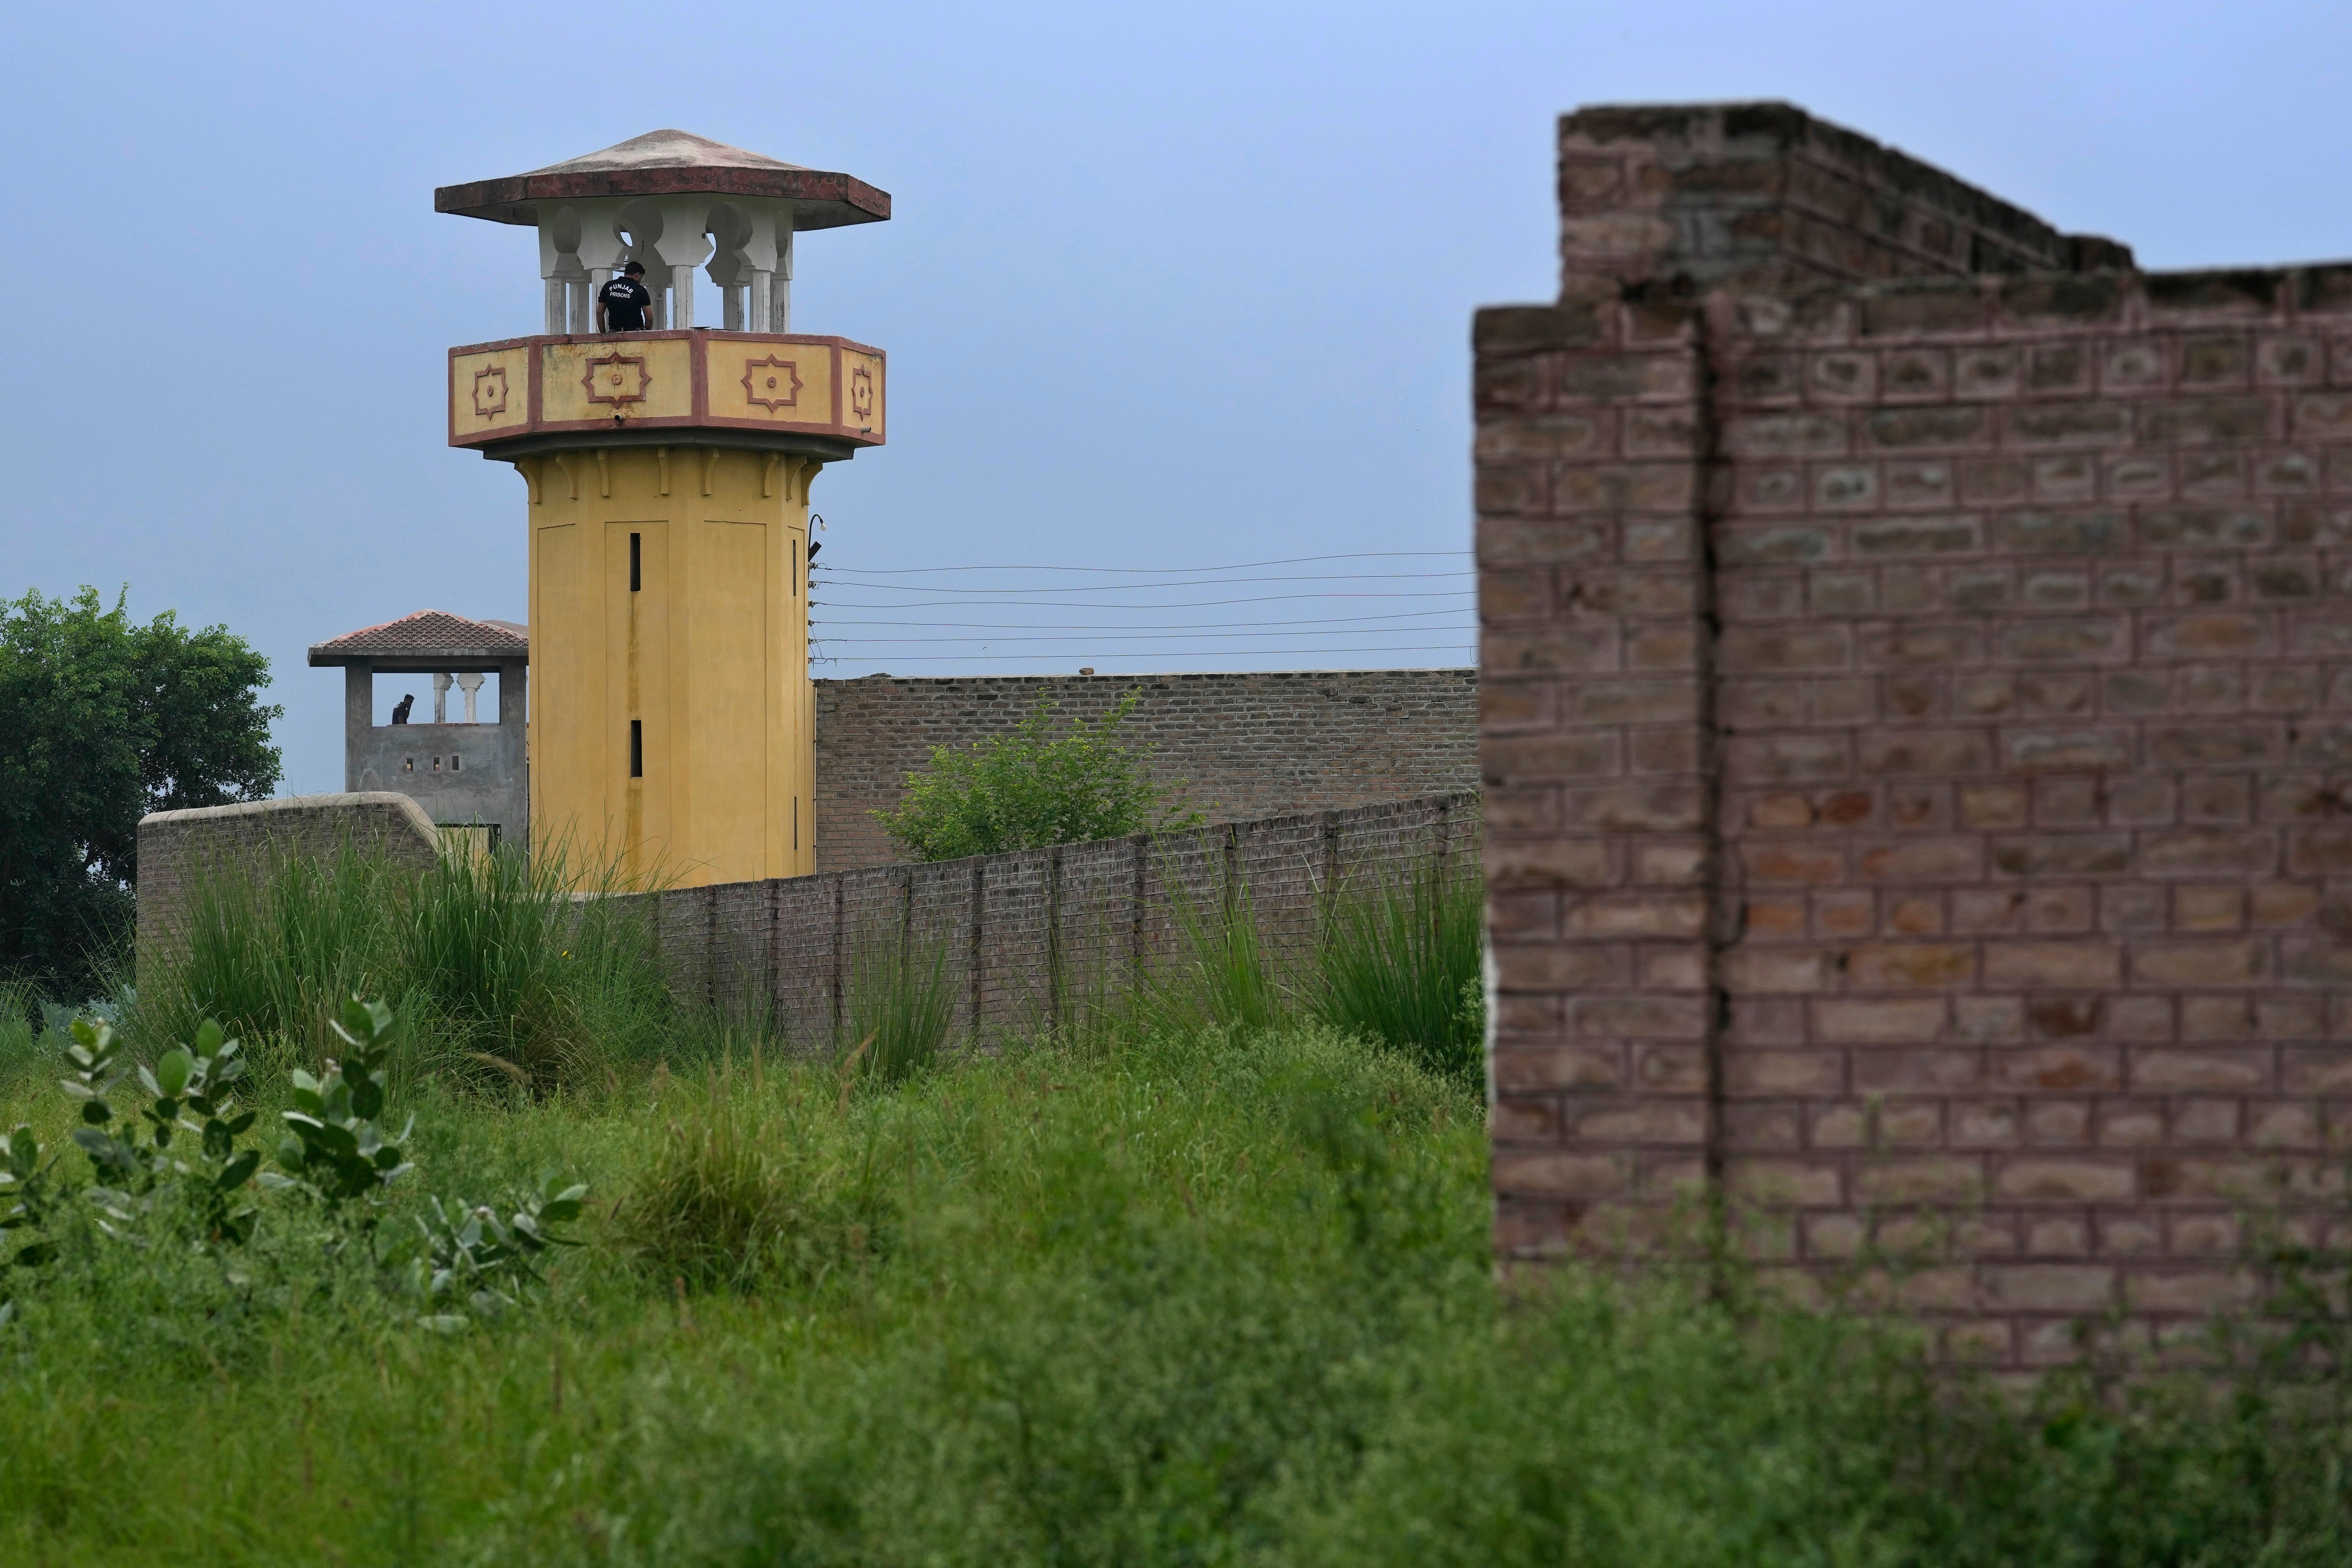 Attock, in eastern Punjab province, where Mr Khan is being held, is notorious for its harsh conditions – its inmates include convicted militants